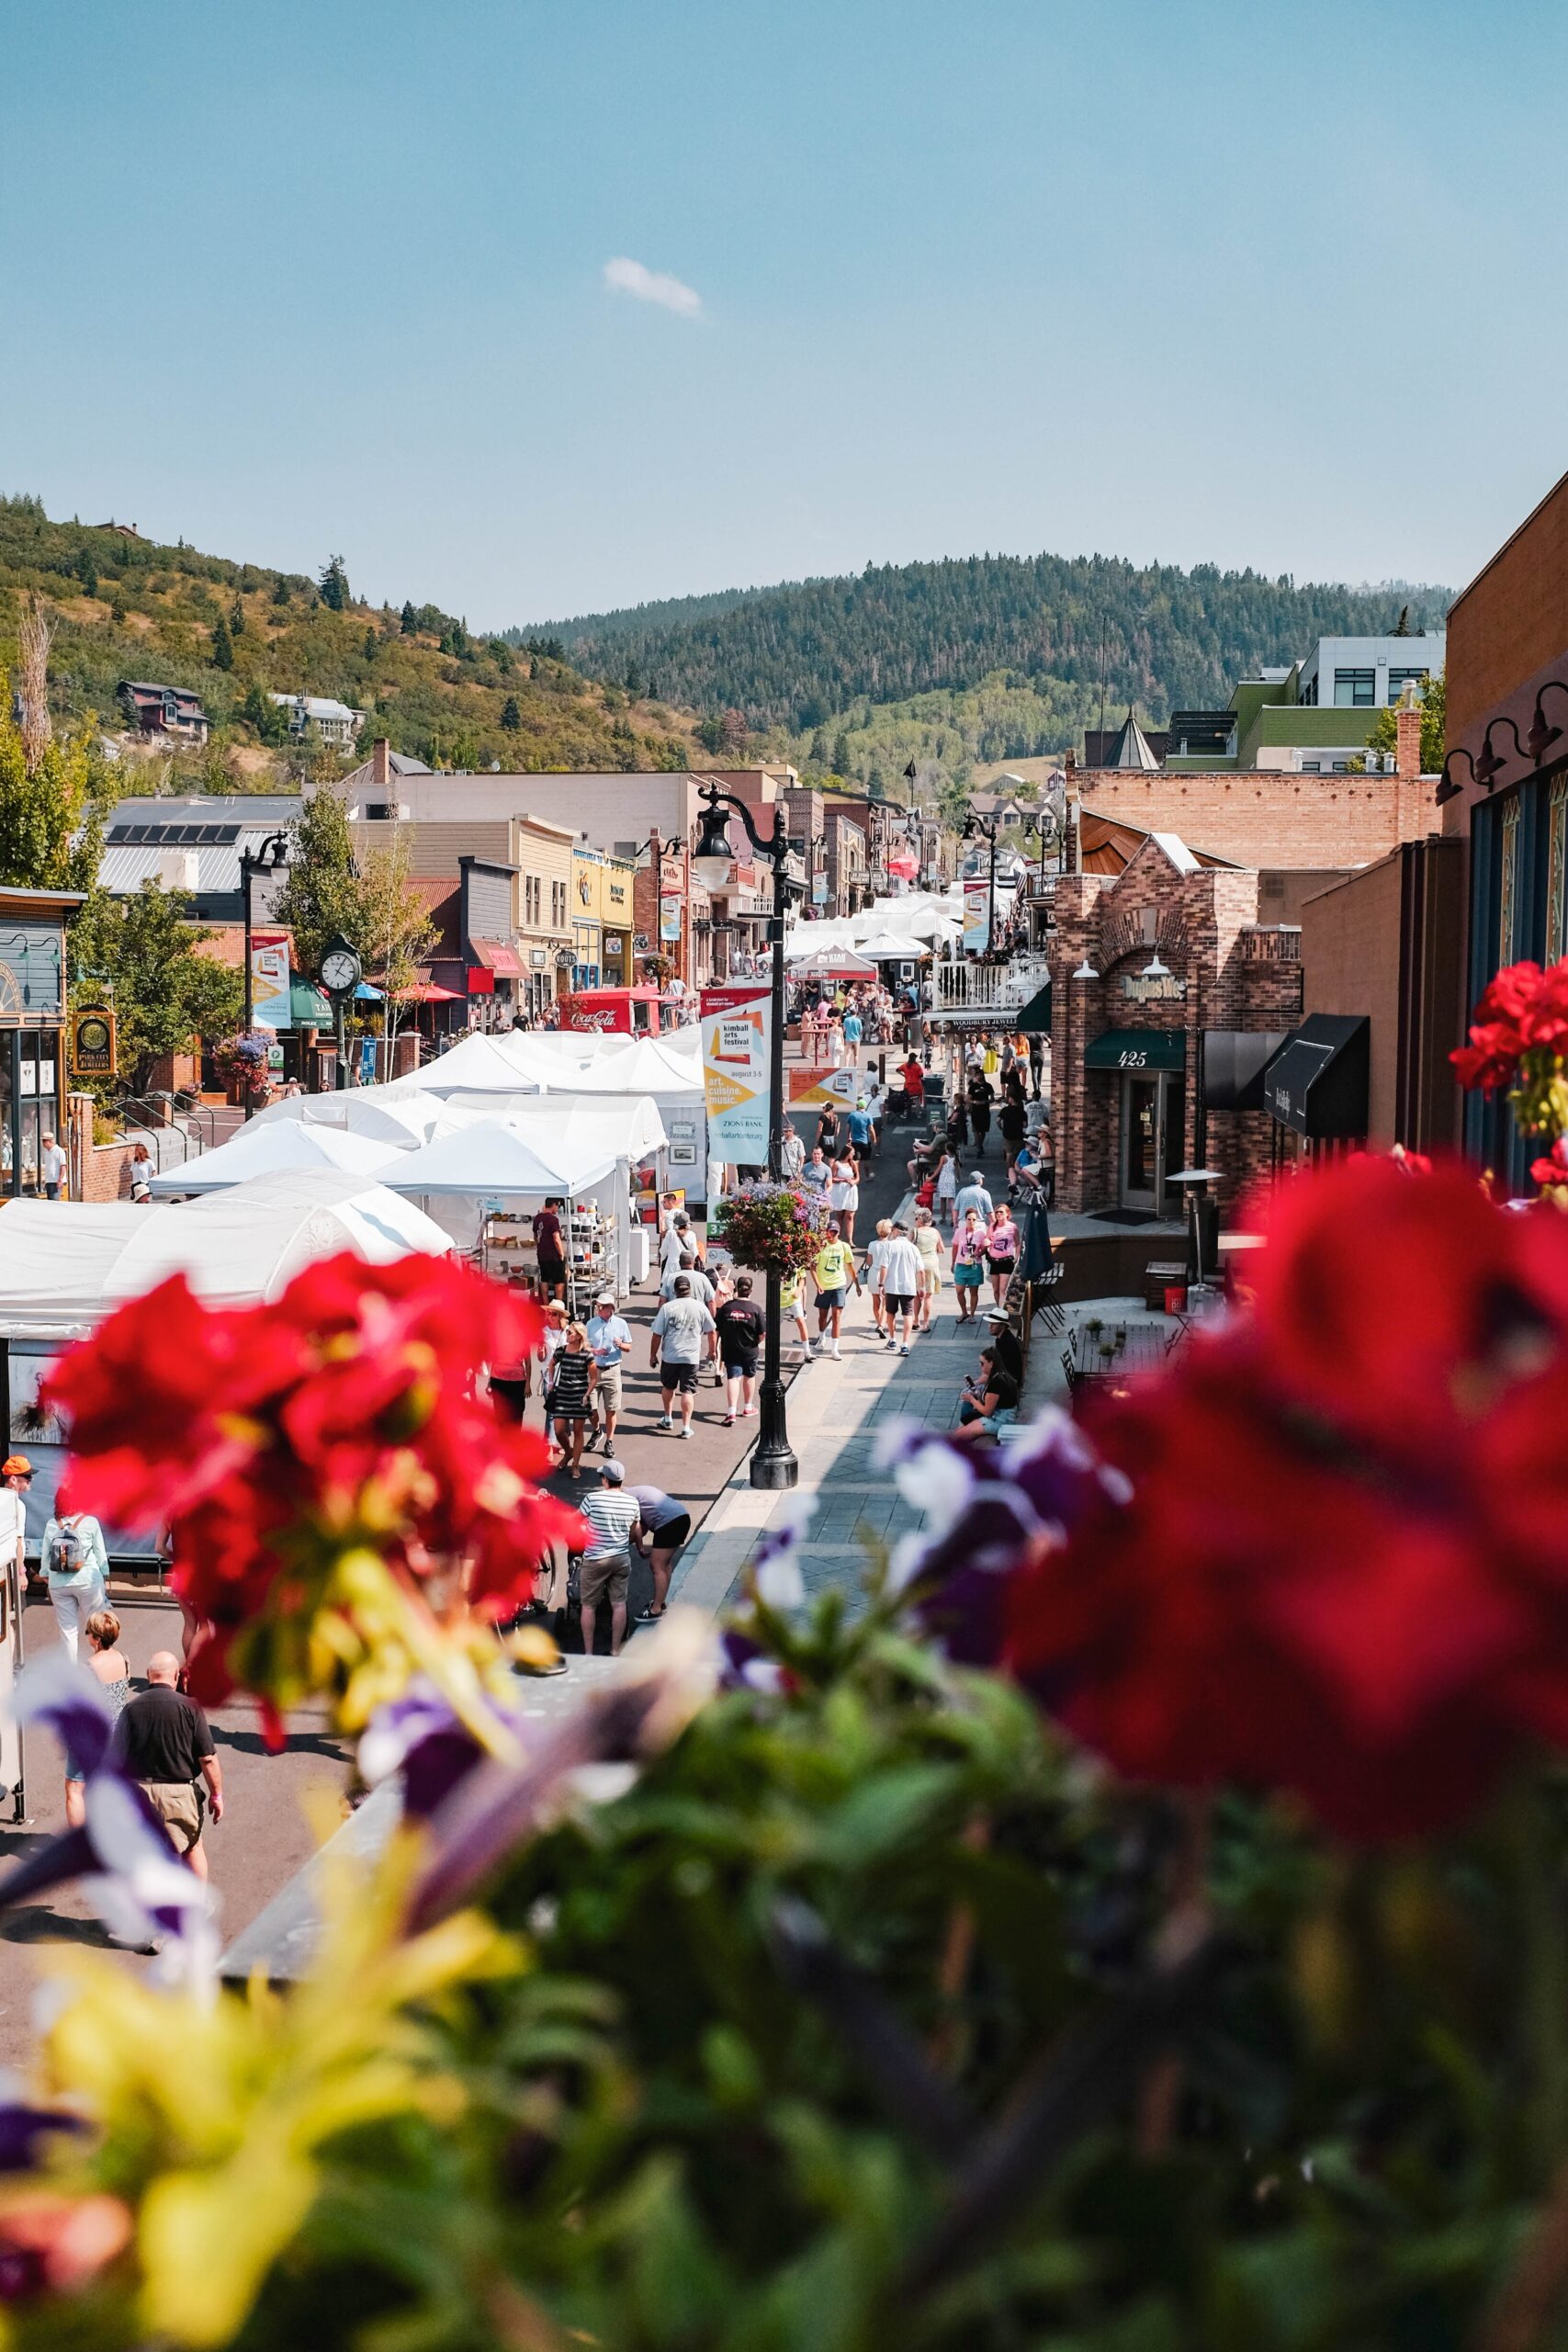 Kimball Arts Festival Taking Place on Main Street Park City in Summer